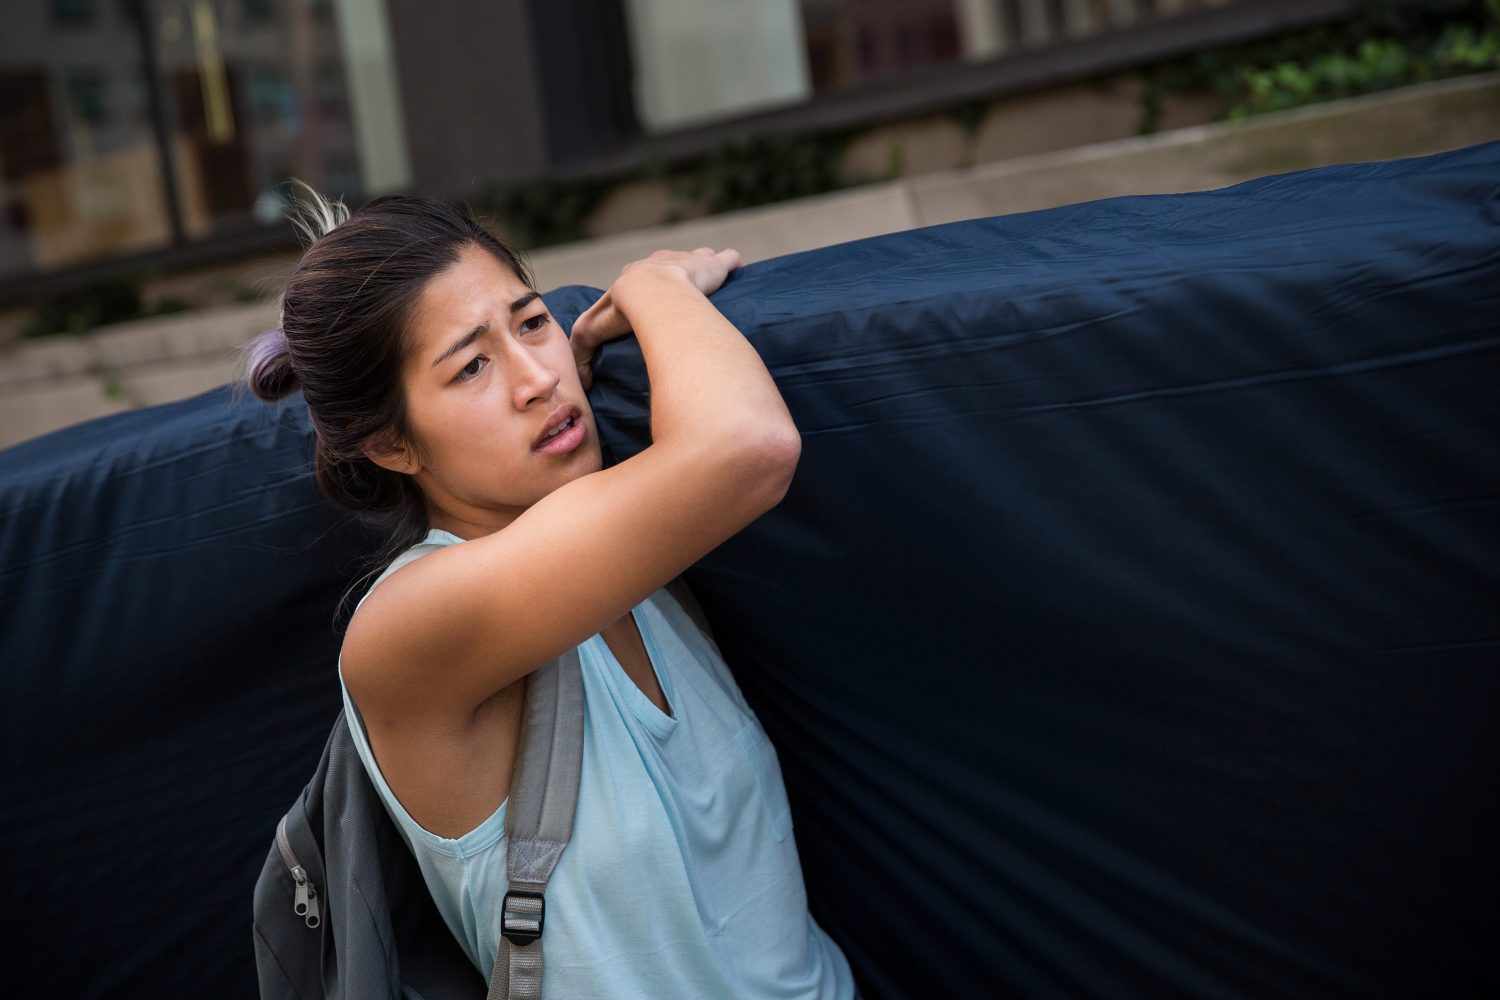 NEW YORK, NY - SEPTEMBER 05:  Emma Sulkowicz, a senior visual arts student at Columbia University, carries a mattress in protest of the universitys lack of action after she reported being raped during her sophomore year on September 5, 2014 in New York City. Sulkowicz has said she is committed to carrying the mattress everywhere she goes until the university expels the rapist or he leaves. The protest is also doubling as her senior thesis project.  (Photo by Andrew Burton/Getty Images)